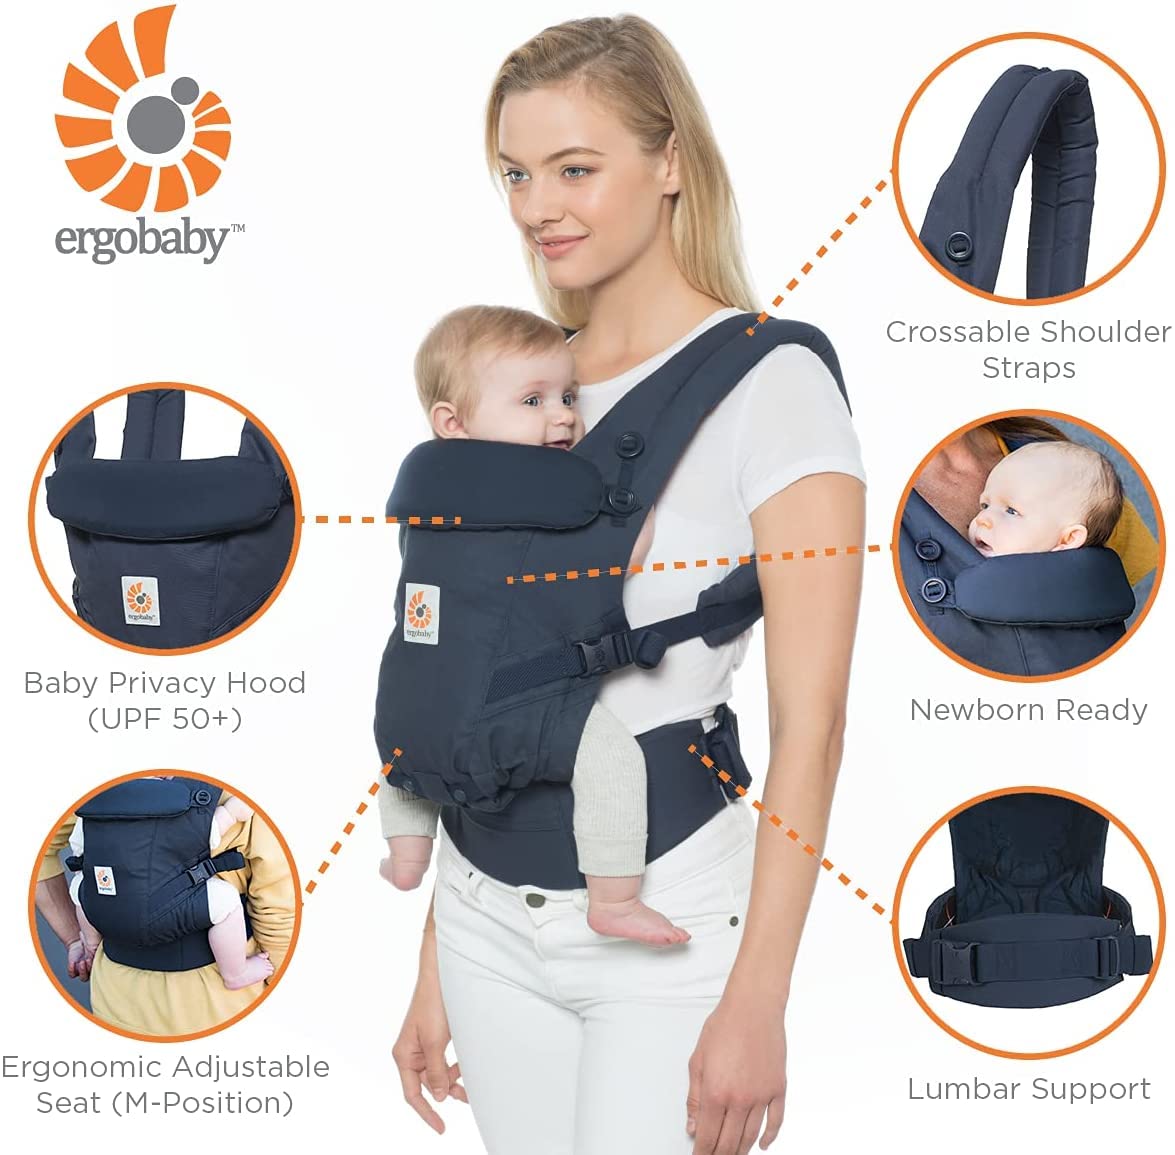 Ergobaby baby carrier for newborns (3.2 to 20 kg) Adapt Cool Air Mesh Deep Blue, ergonomic baby carrier, front carrier and back carrier, blue